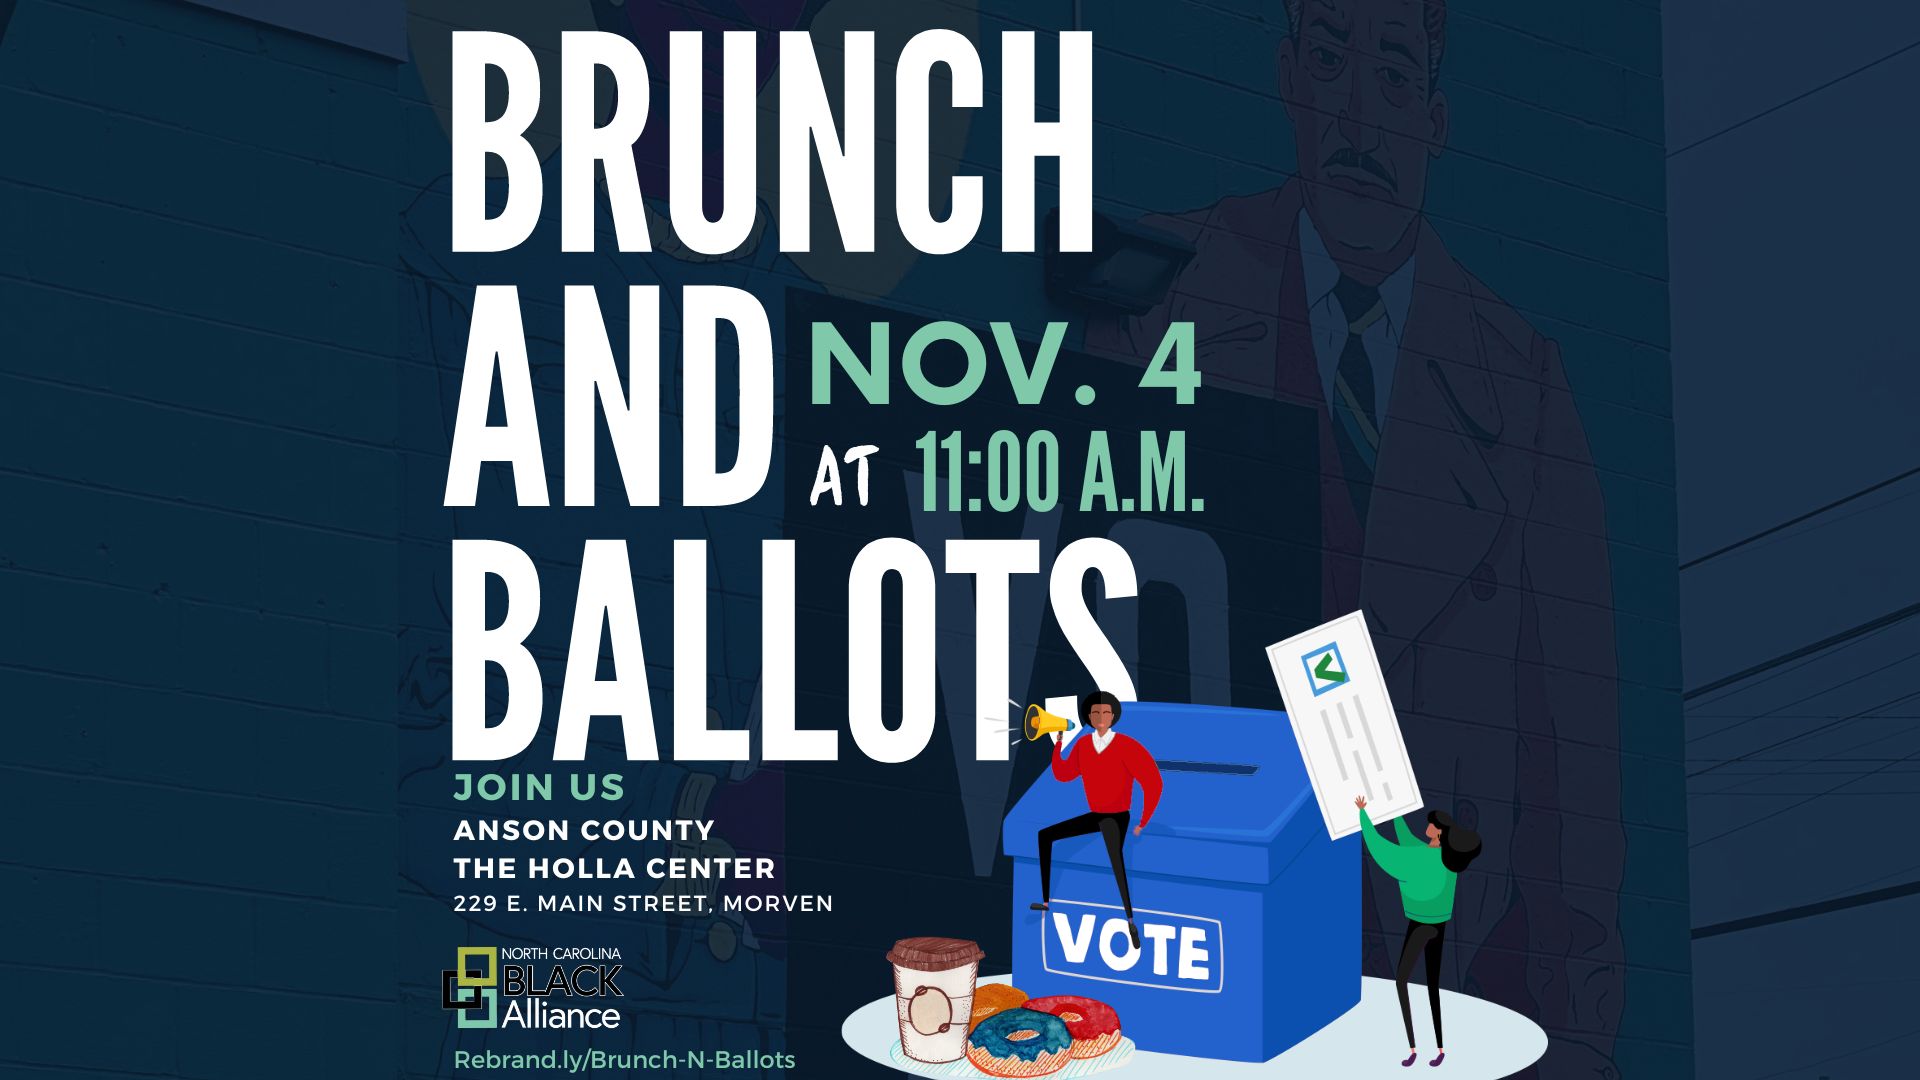 Brunch and Ballots Anson County